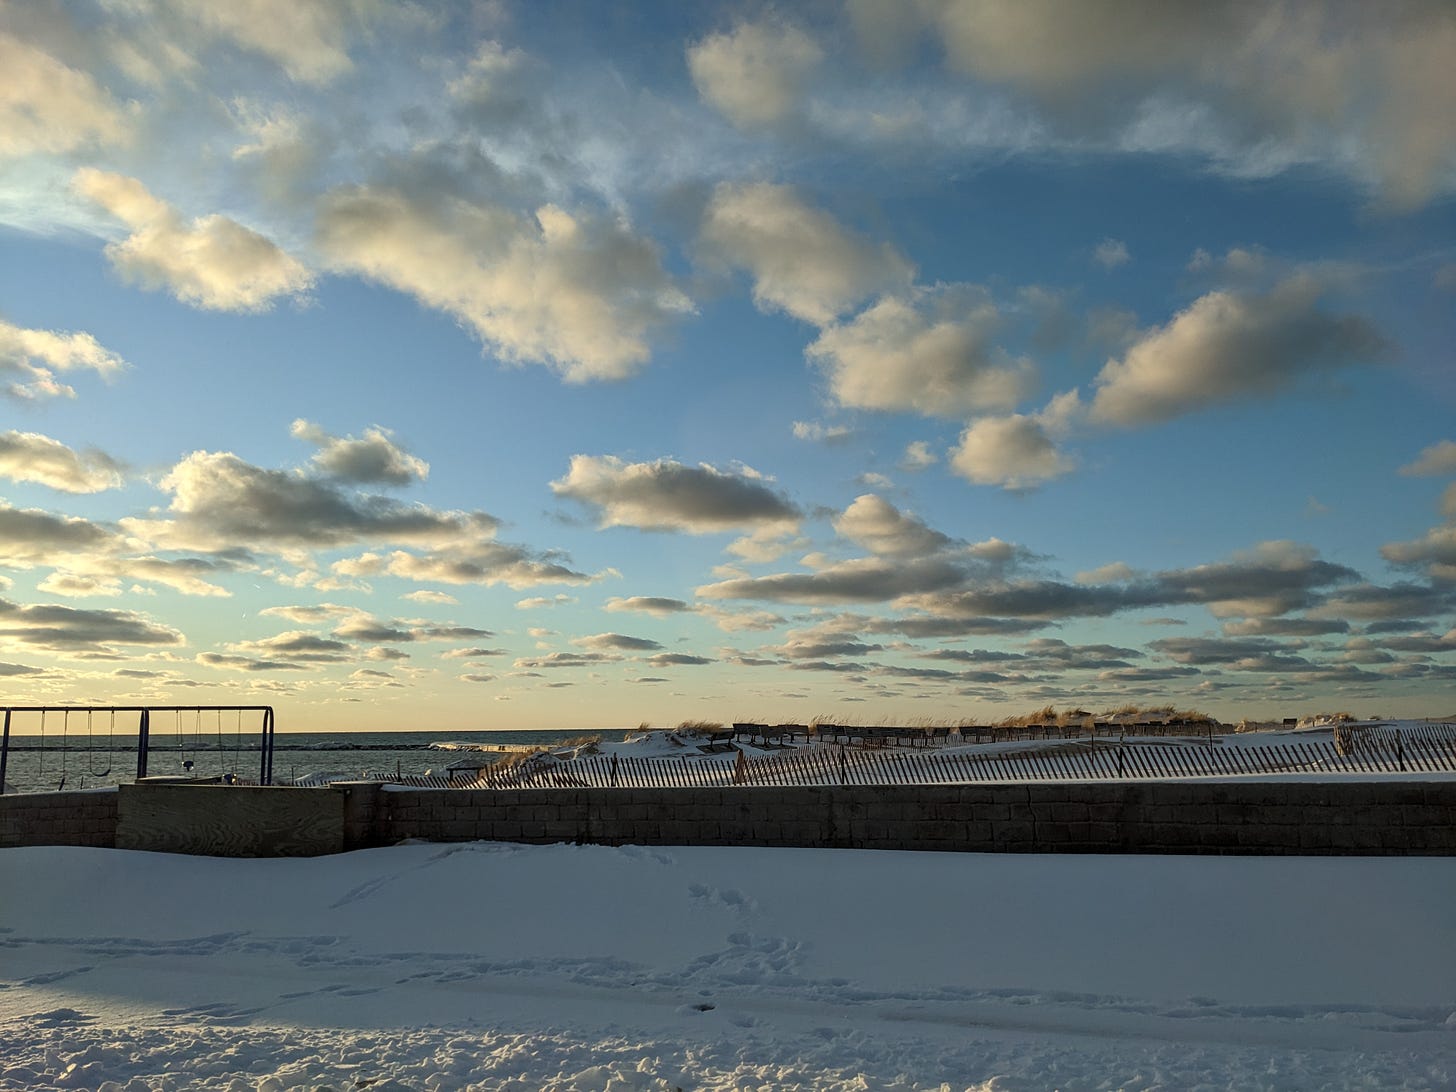 A photo of Lake Michigan in winter. There's white snow in the foreground and a low wall leading to the beach area. An empty swingset, snow fence, and a number of benches sit on the beach. The sky is many shades of blue with a number of clouds scattered throughout.